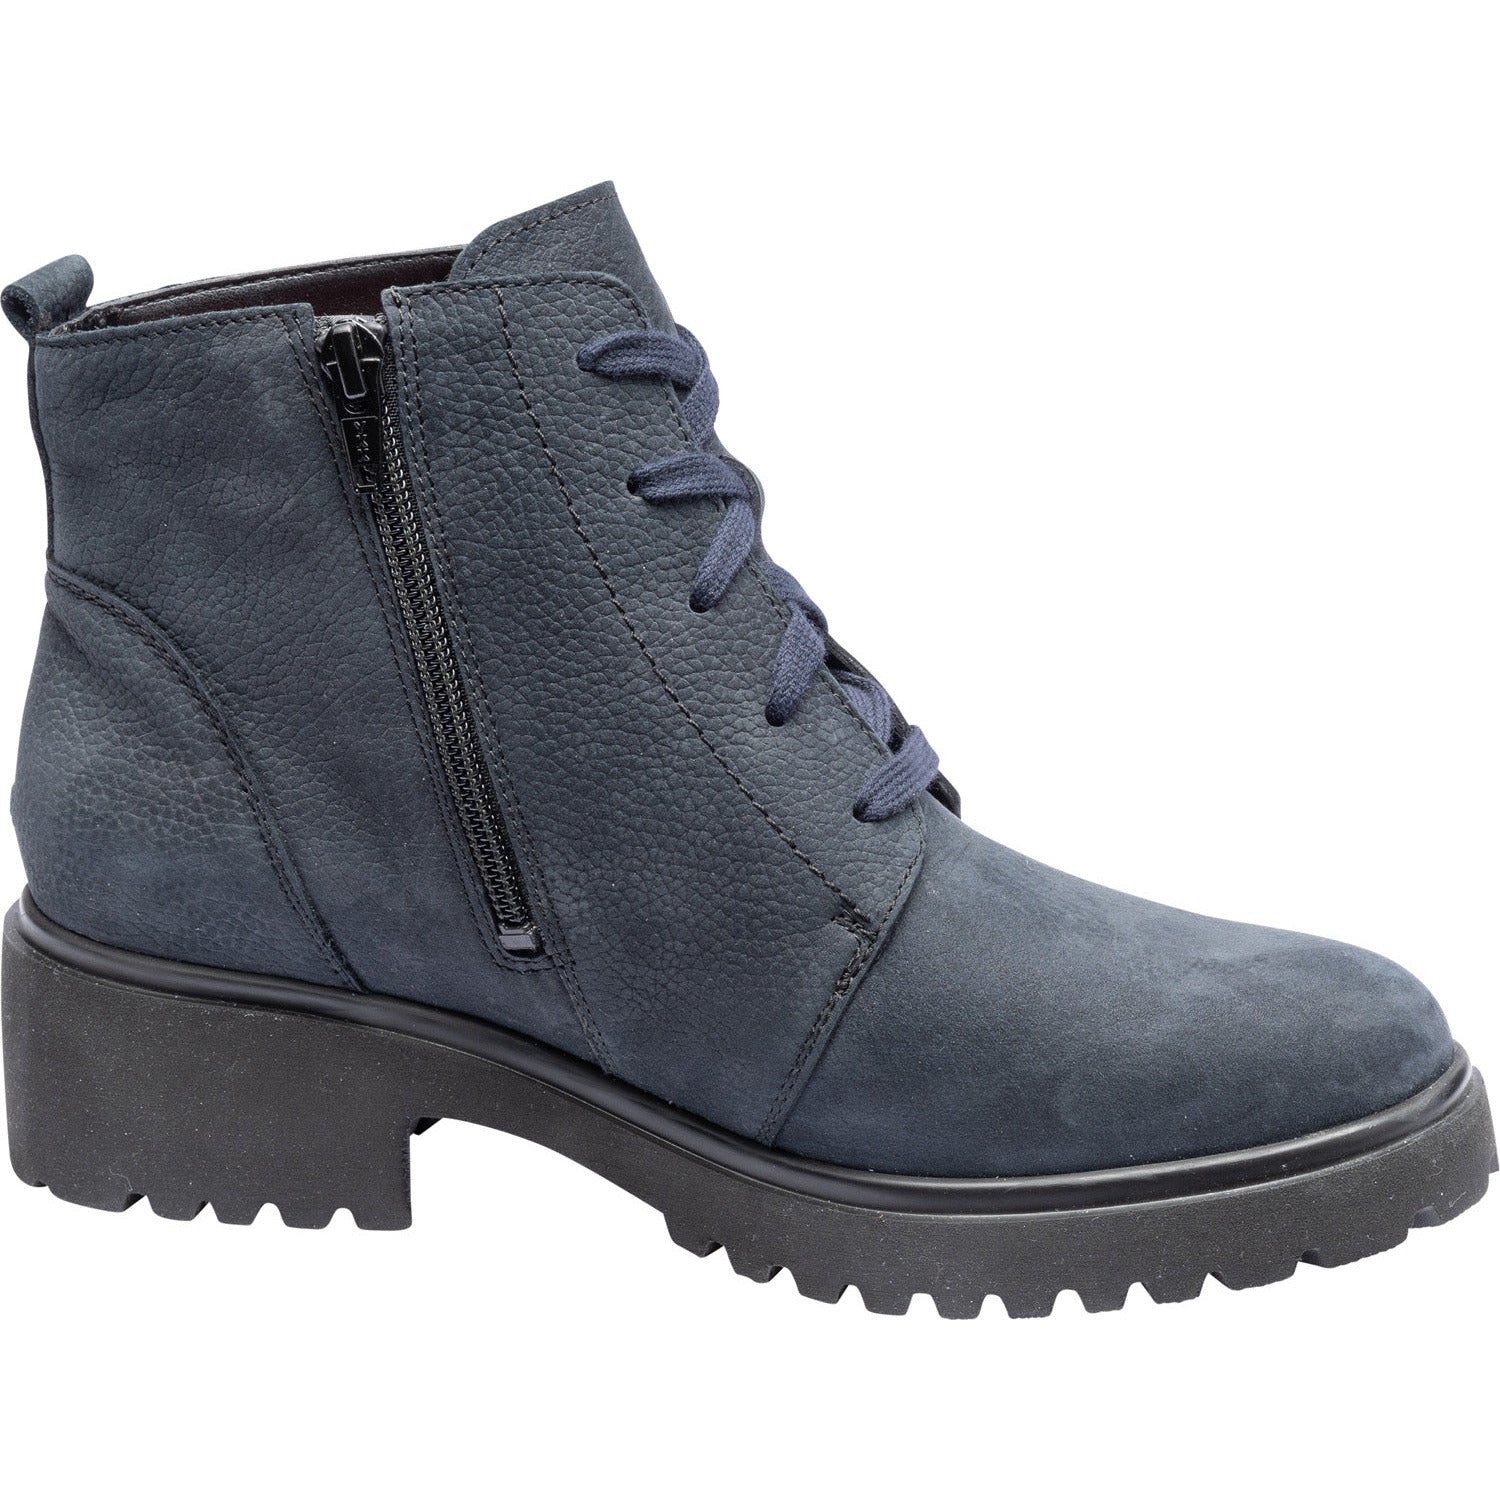 Waldlaufer Luise (716807) - Ladies Lace-up Boot with Zip in Navy Nubuck . Waldlaufer Shoes & Boots | Wide fit Shoes | Wisemans | Bantry | West Cork | Cork | Ireland